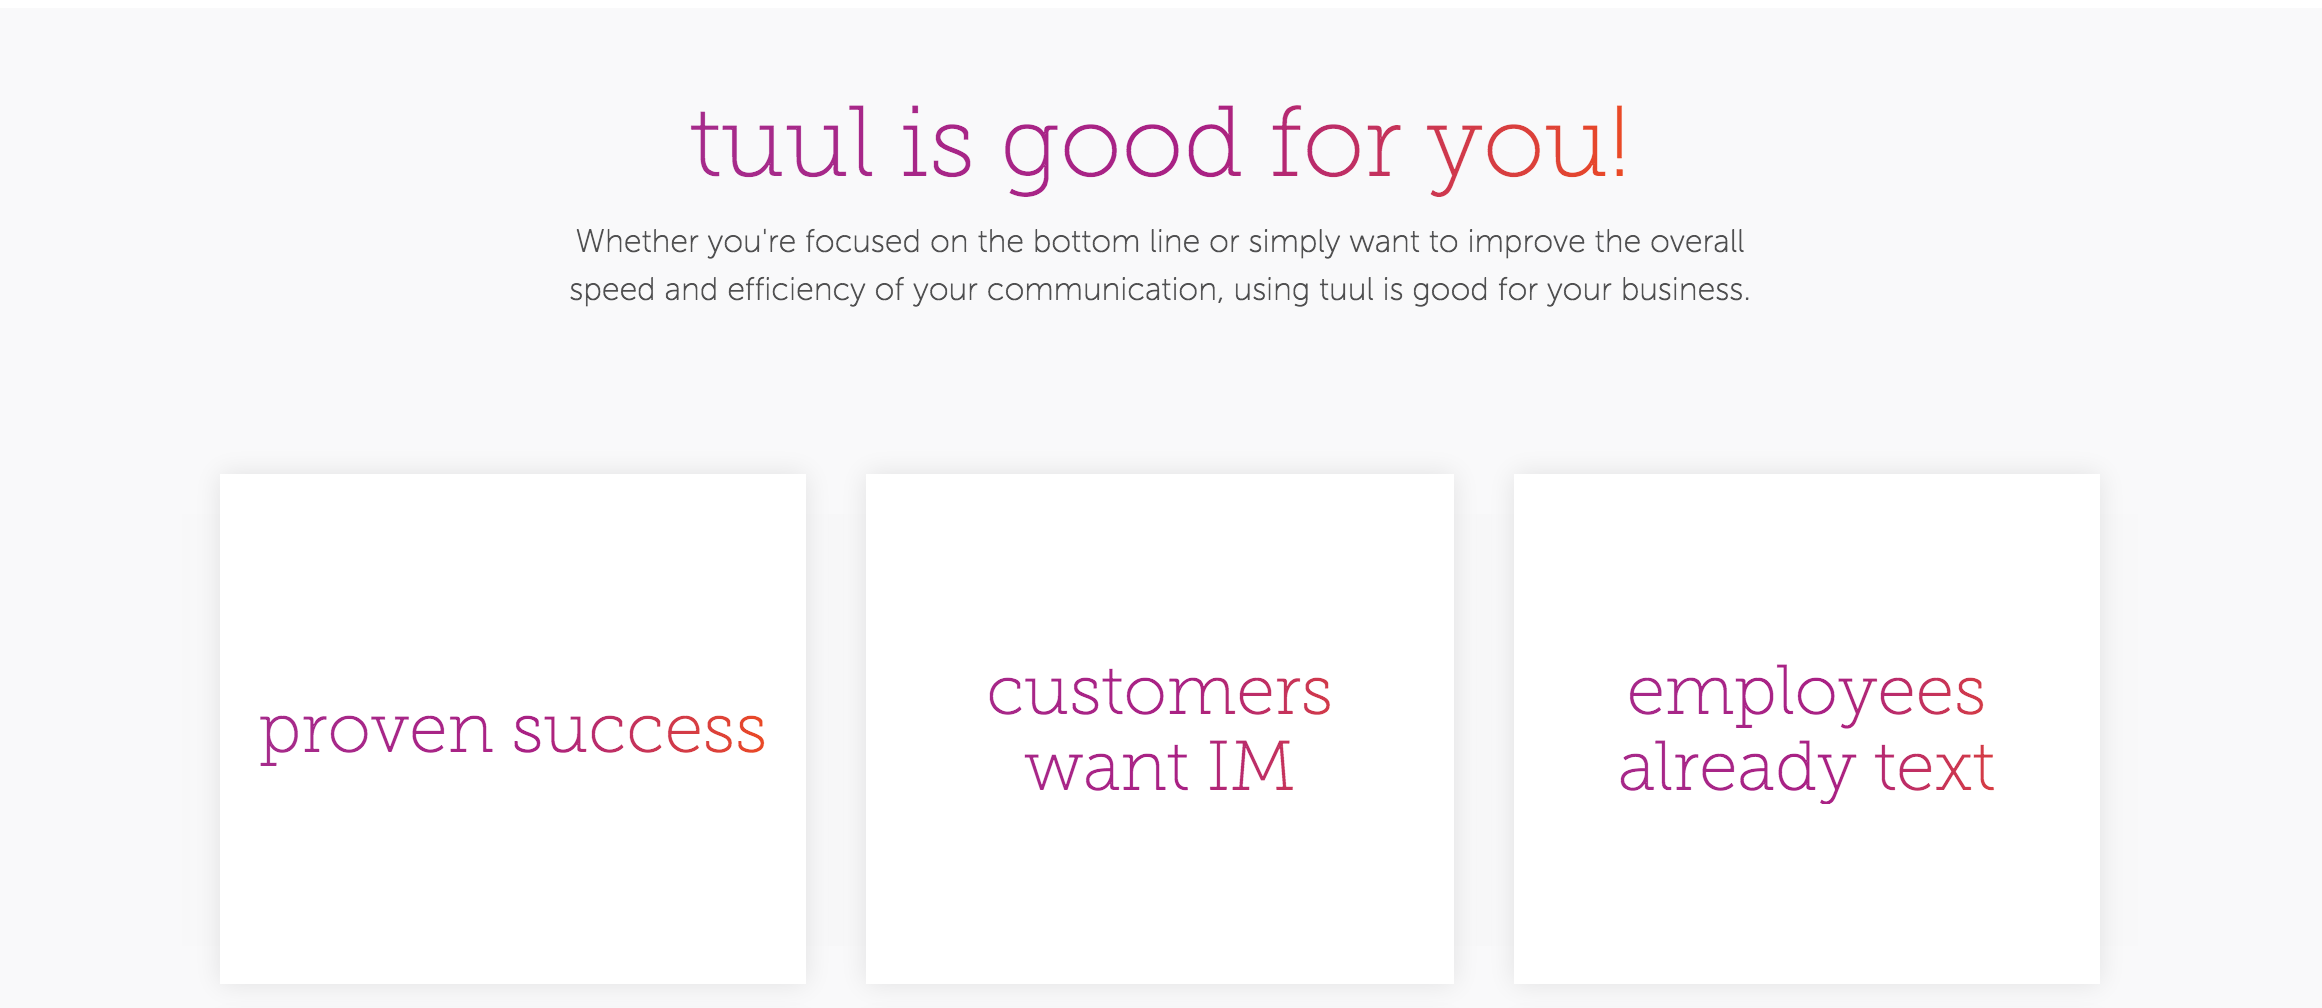 tuul-web-05.png